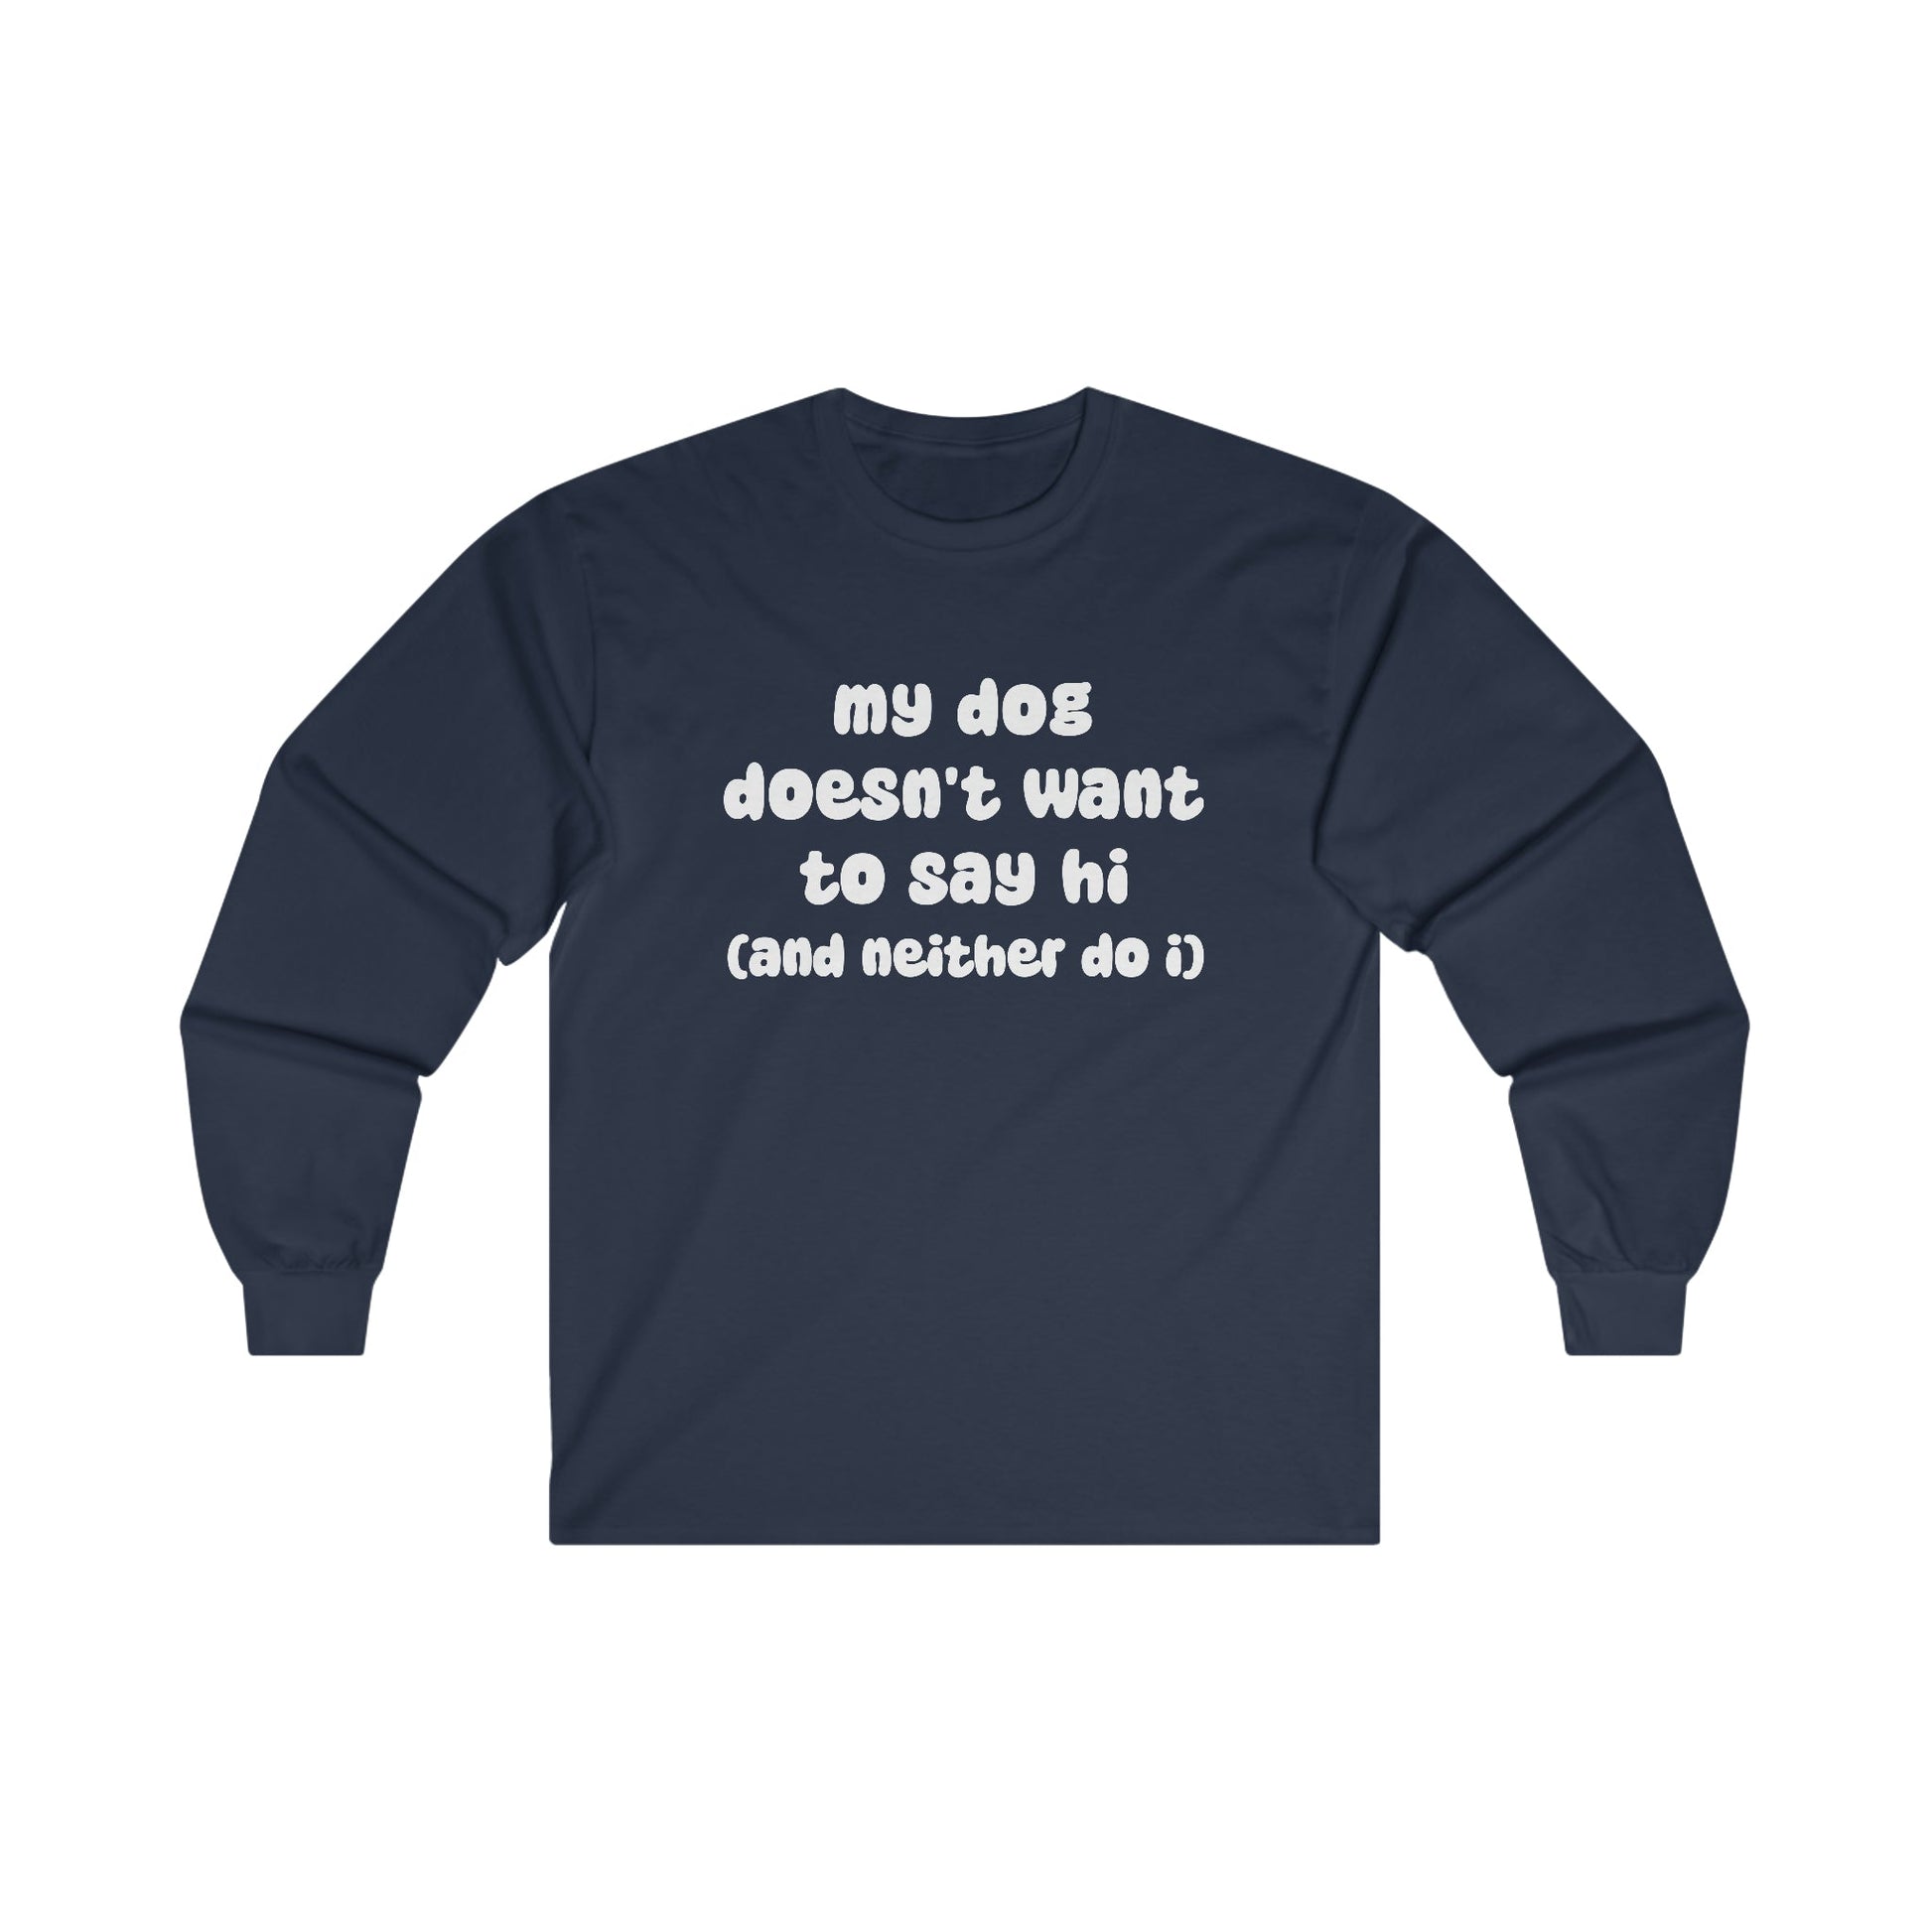 My Dog Doesn't Want To Say Hi (And Neither Do I) | Long Sleeve Tee - Detezi Designs-23374892597244126034